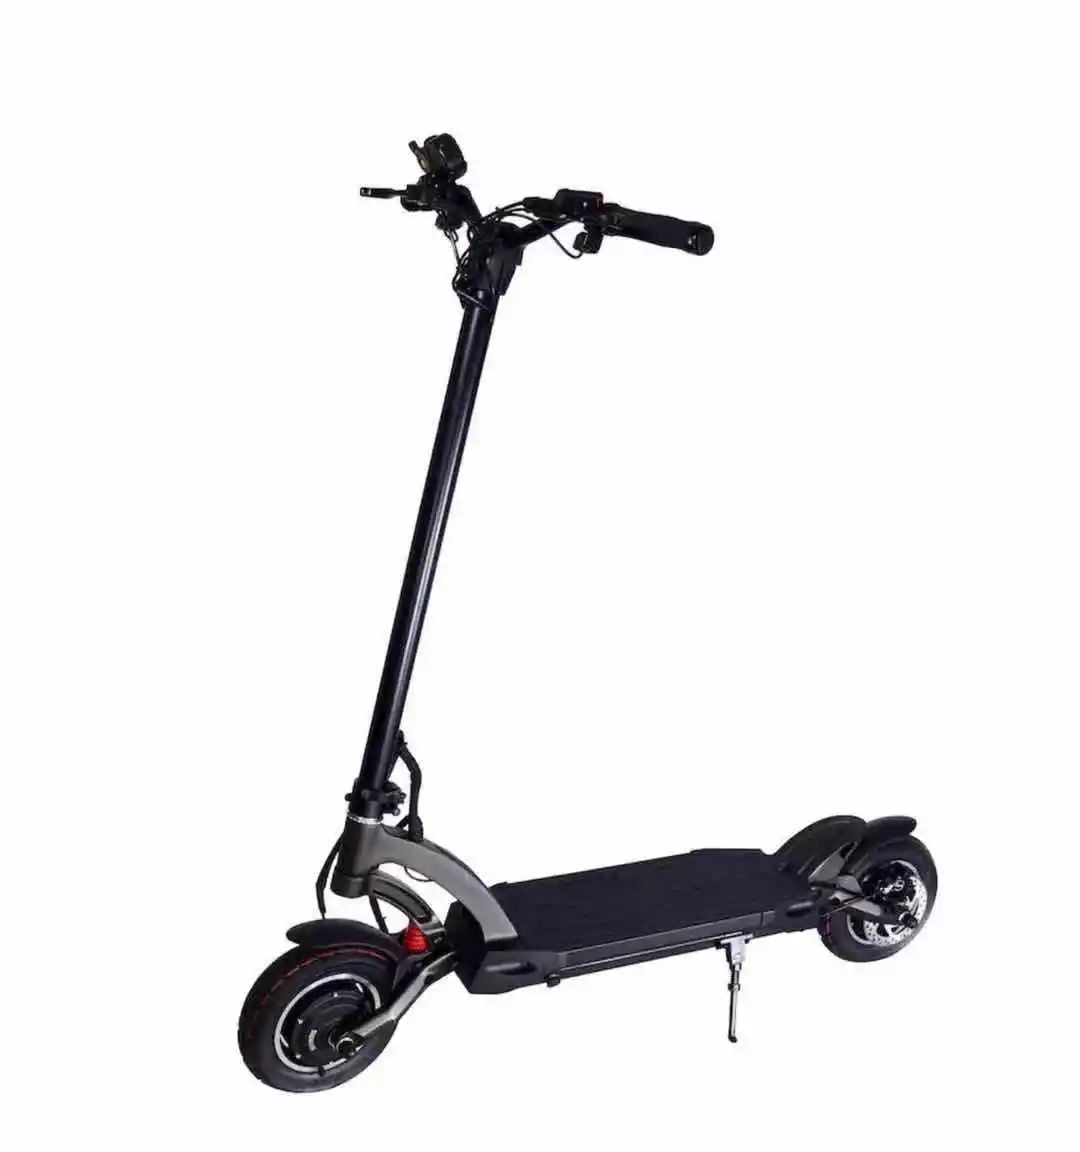 

2020 ]Newest Version Pro Kaabo Mantis Electric Scooter 60V24.5ah Battery Minimotor Controller Top Speed 60km/h